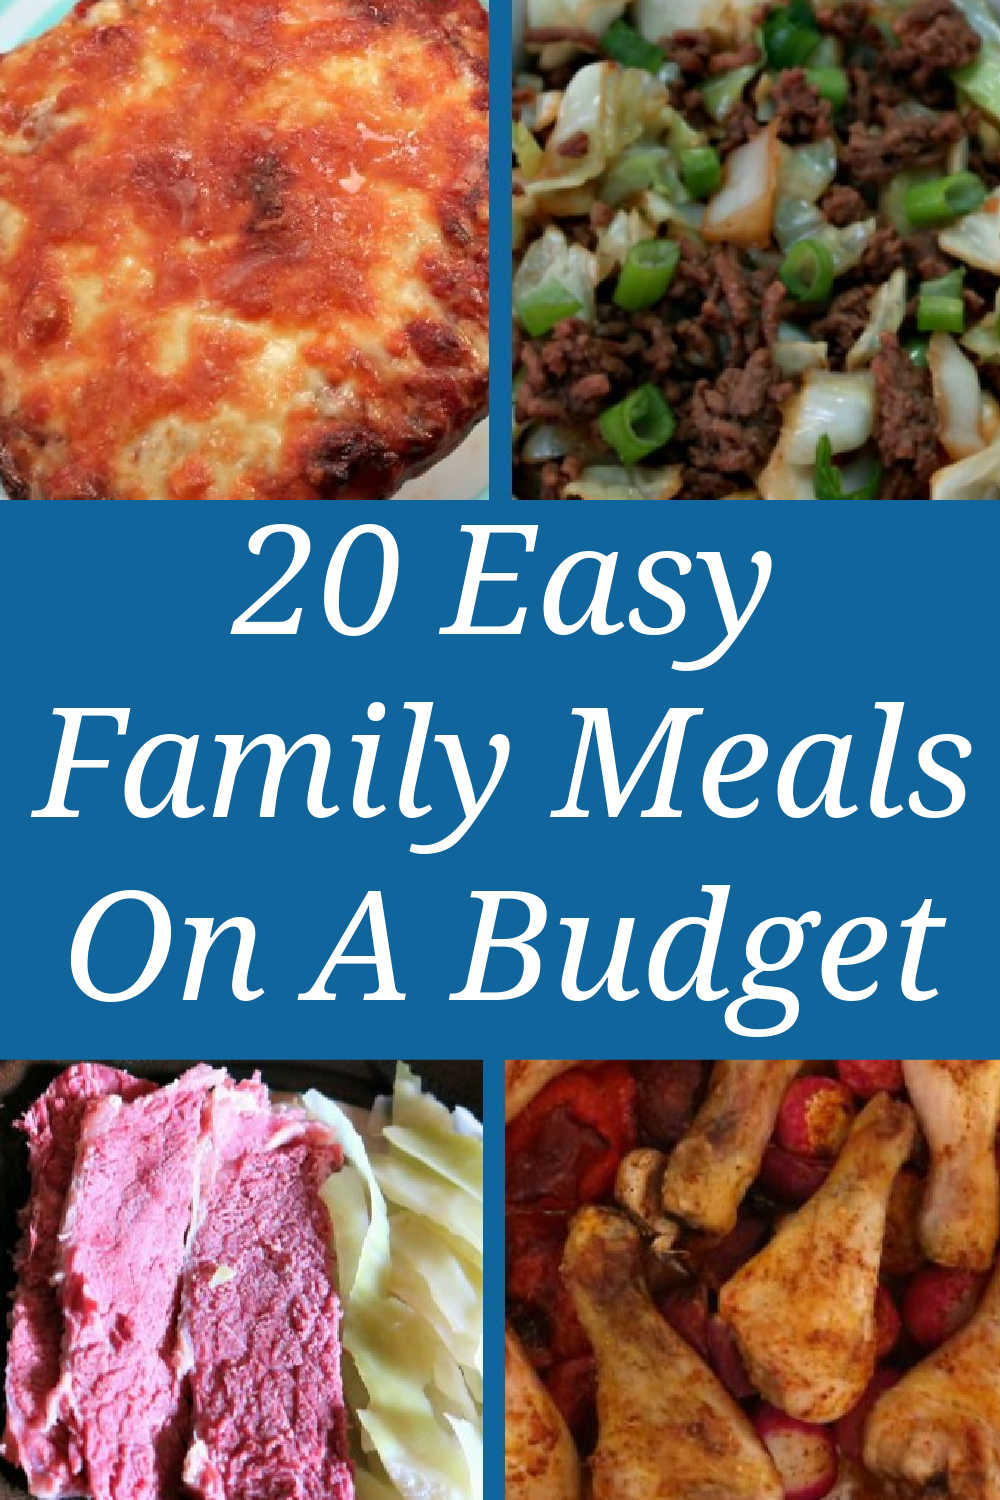 20 Family Meals On A Budget - Extremely Cheap & Easy Dinner Ideas